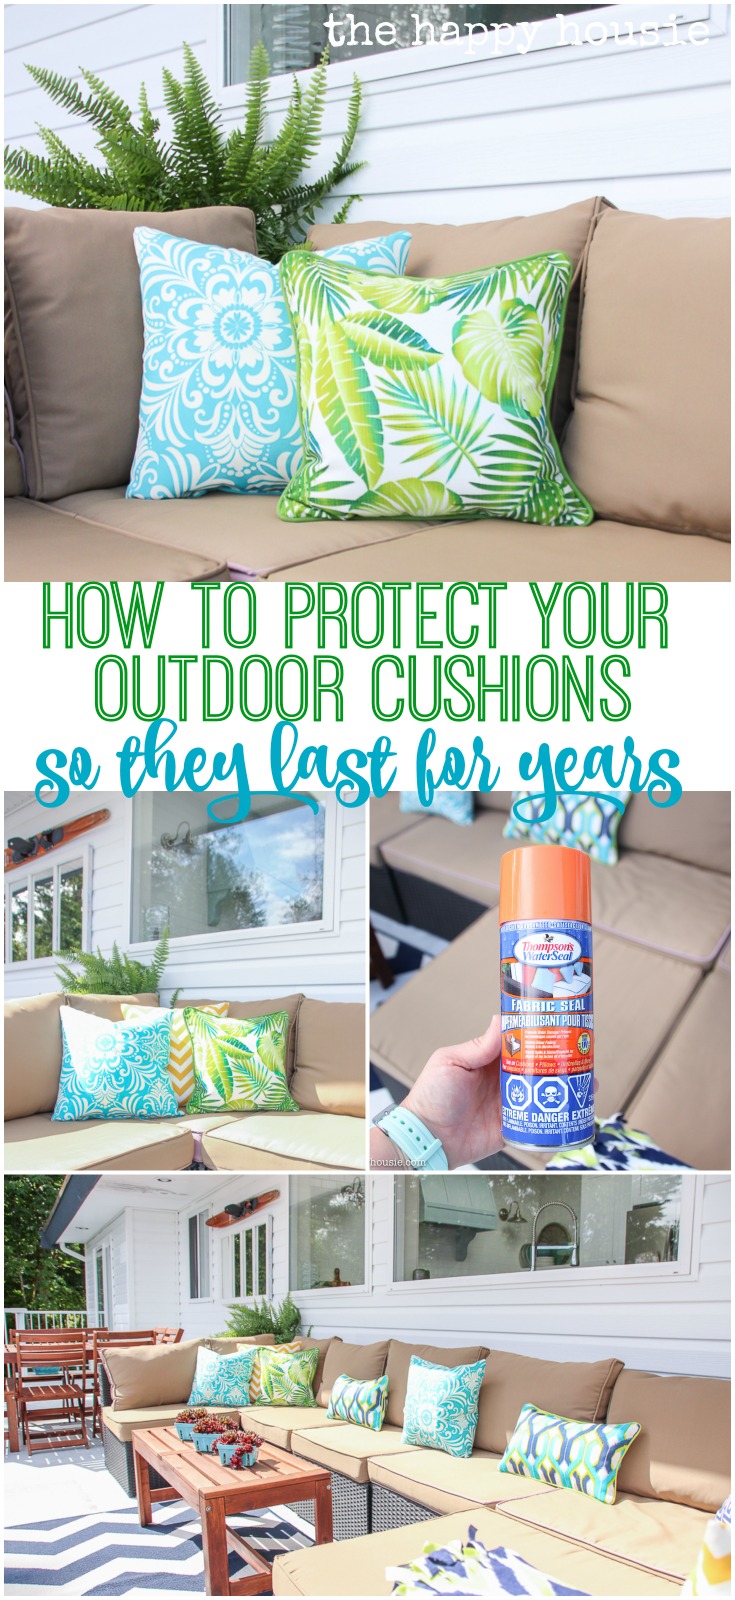 How to Protect Your Outdoor Cushions from the elements of summer so they last you for years poster.